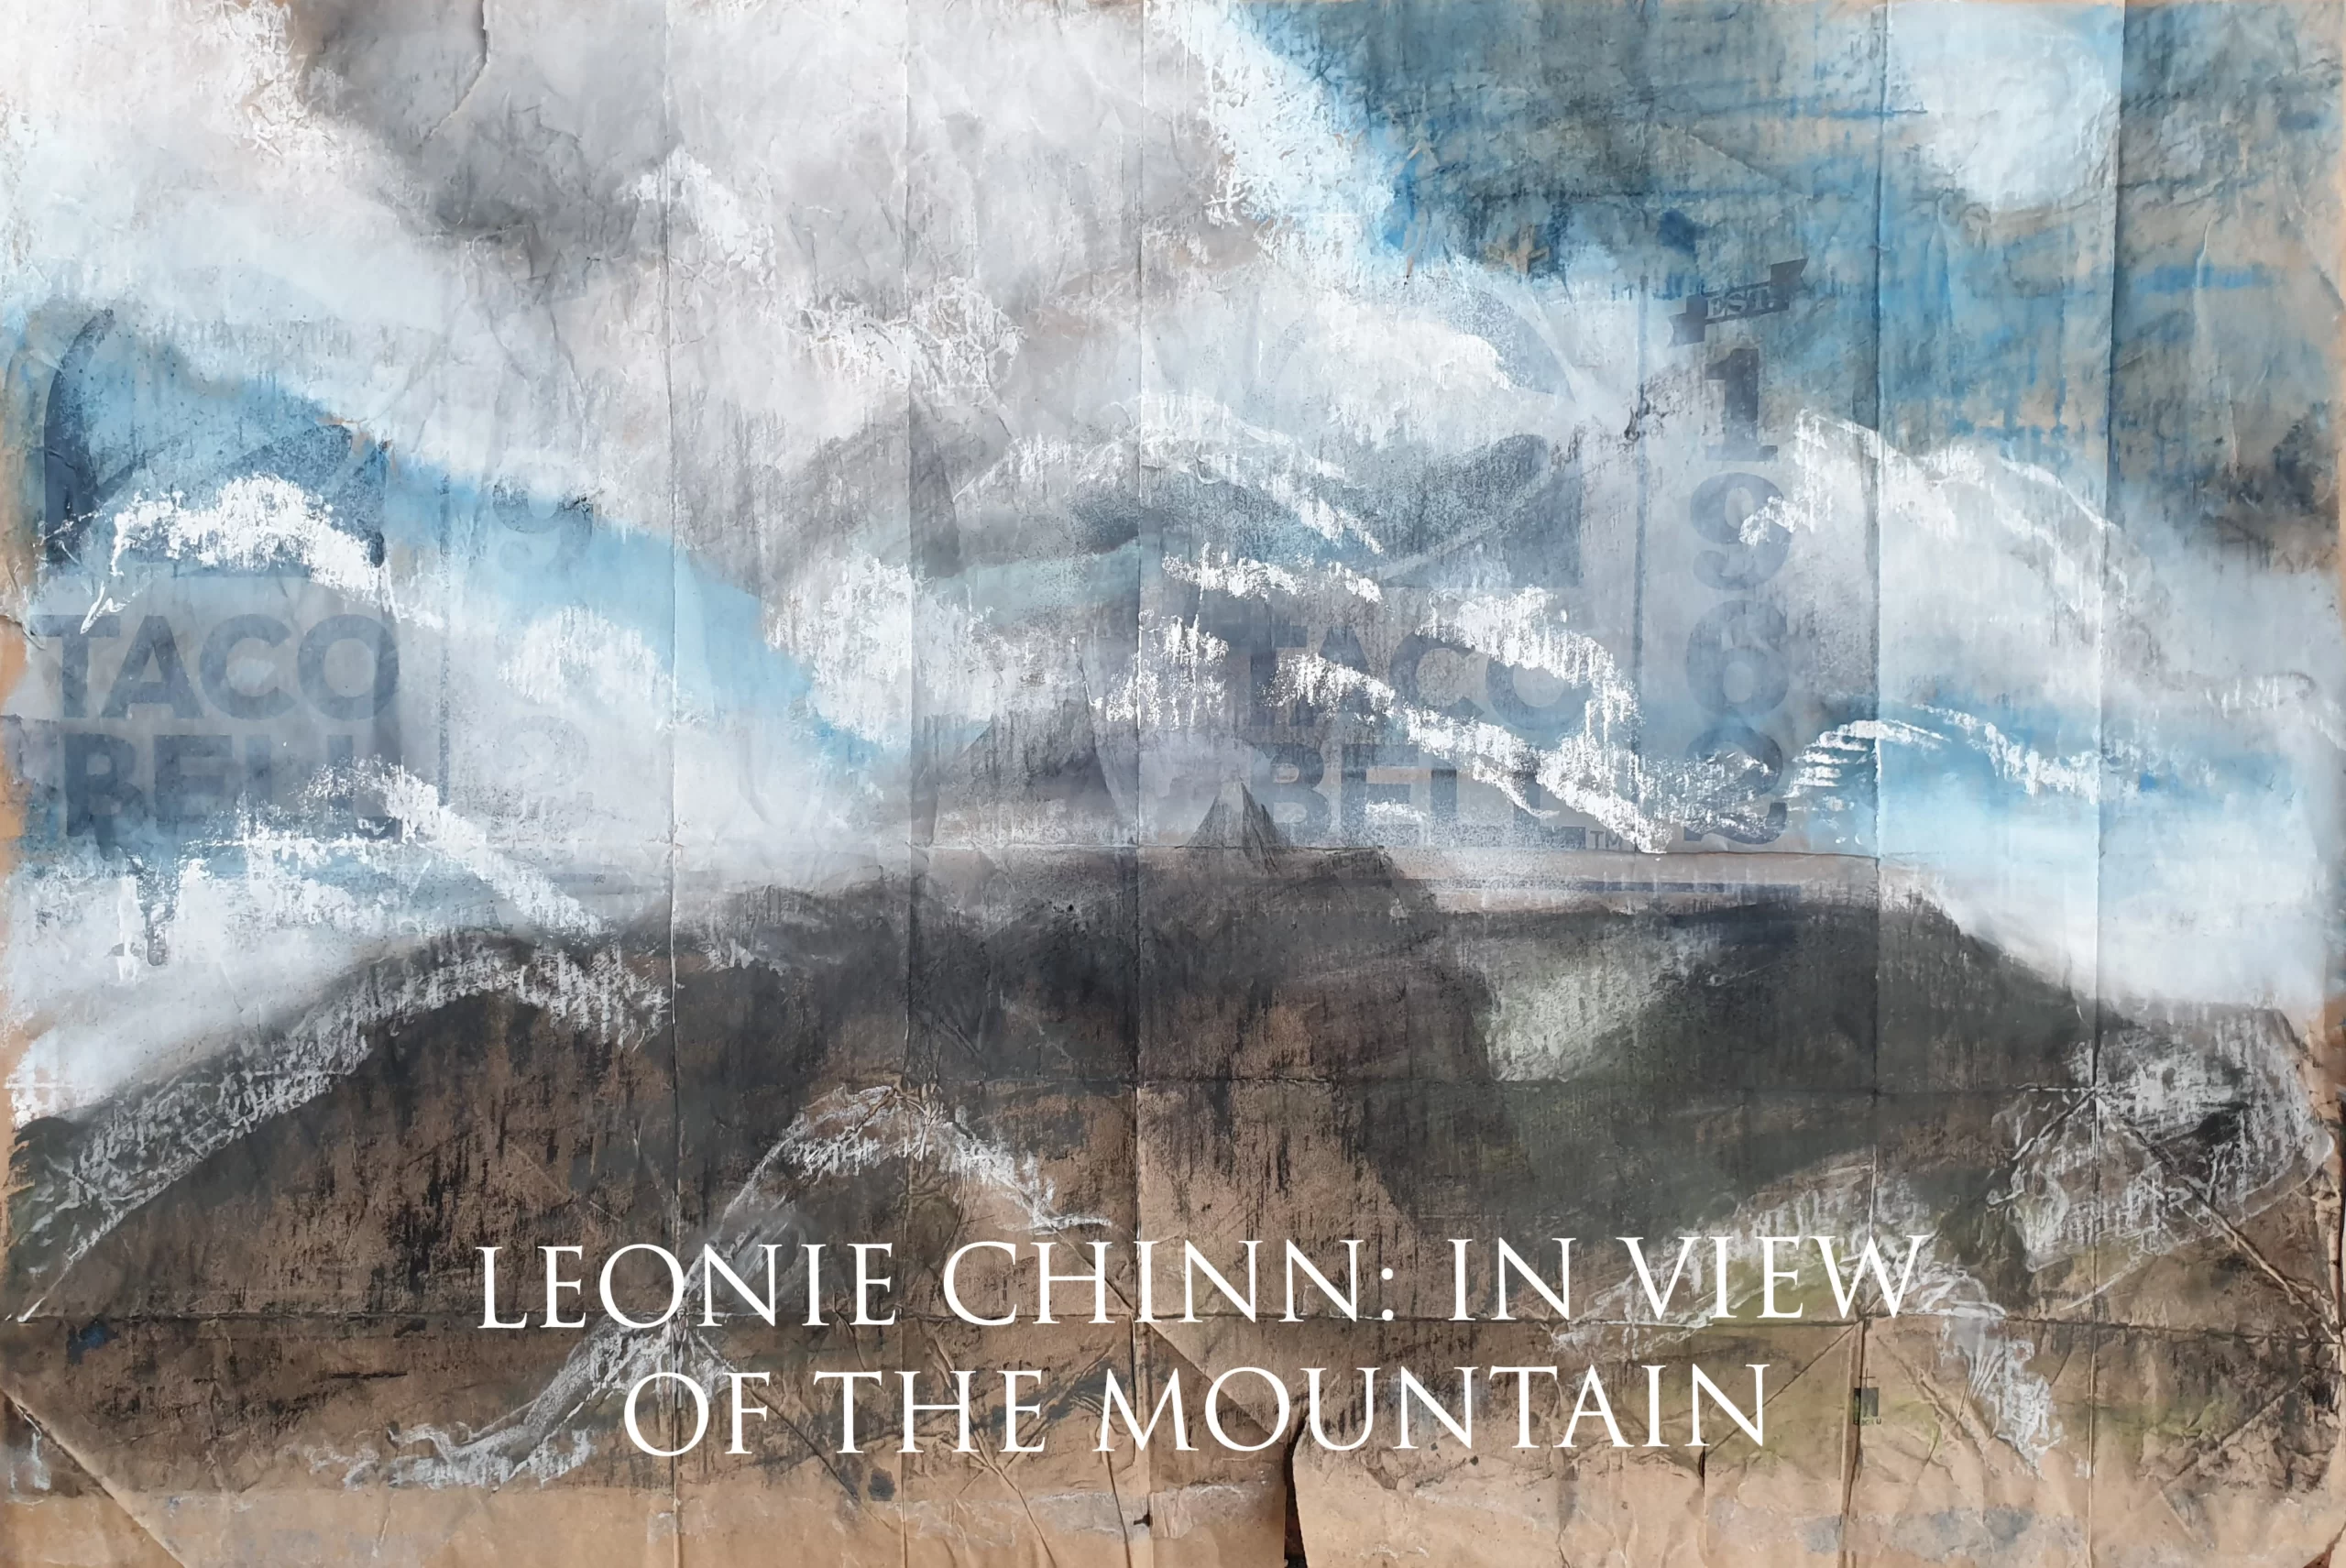 Leonie Chinn "In view of the Mountain" May Exhibition 2022